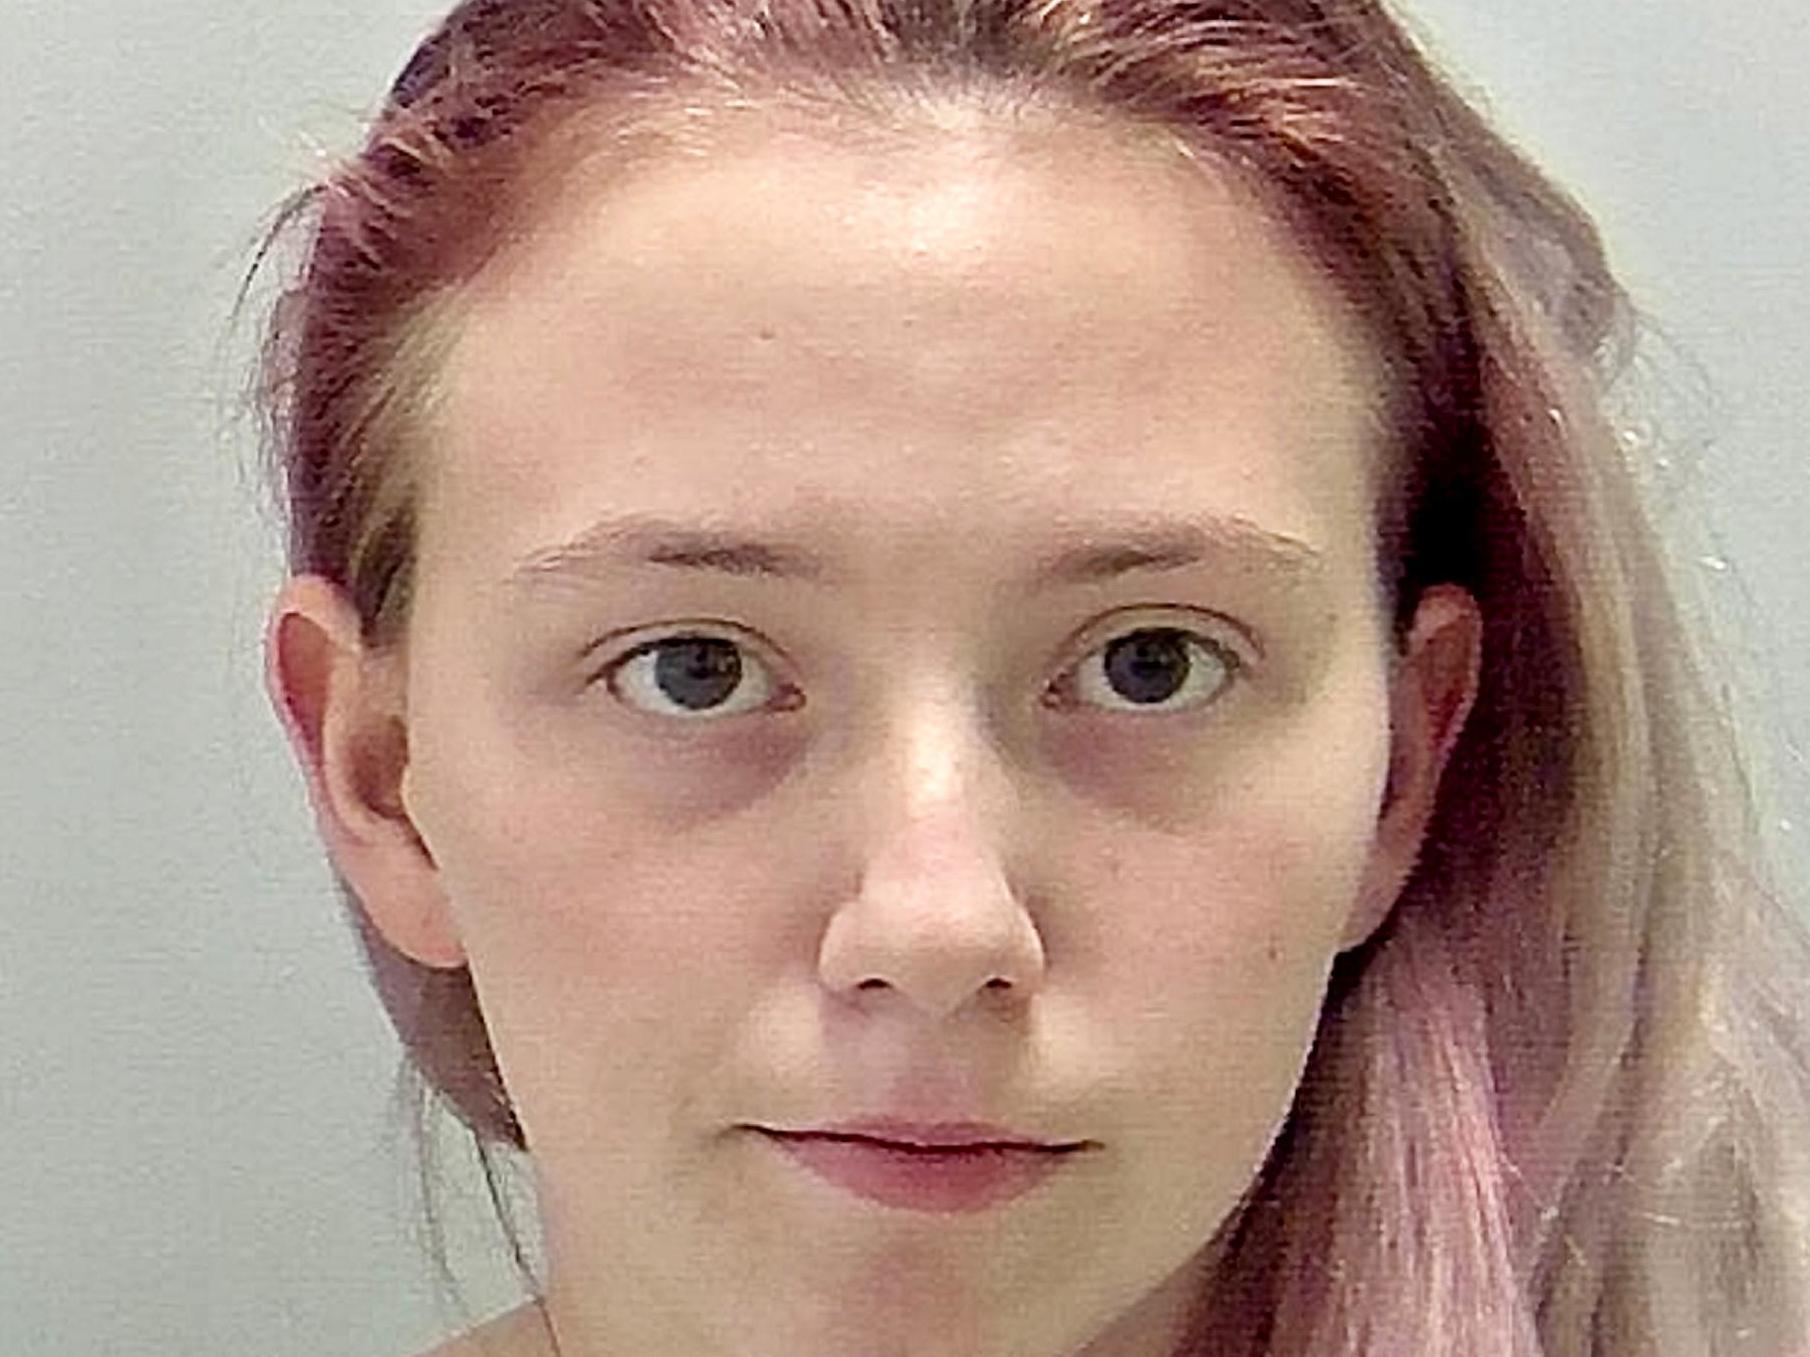 Clarice Crothers, 18, has been sentenced to eight months in prison for perverting the course of justice